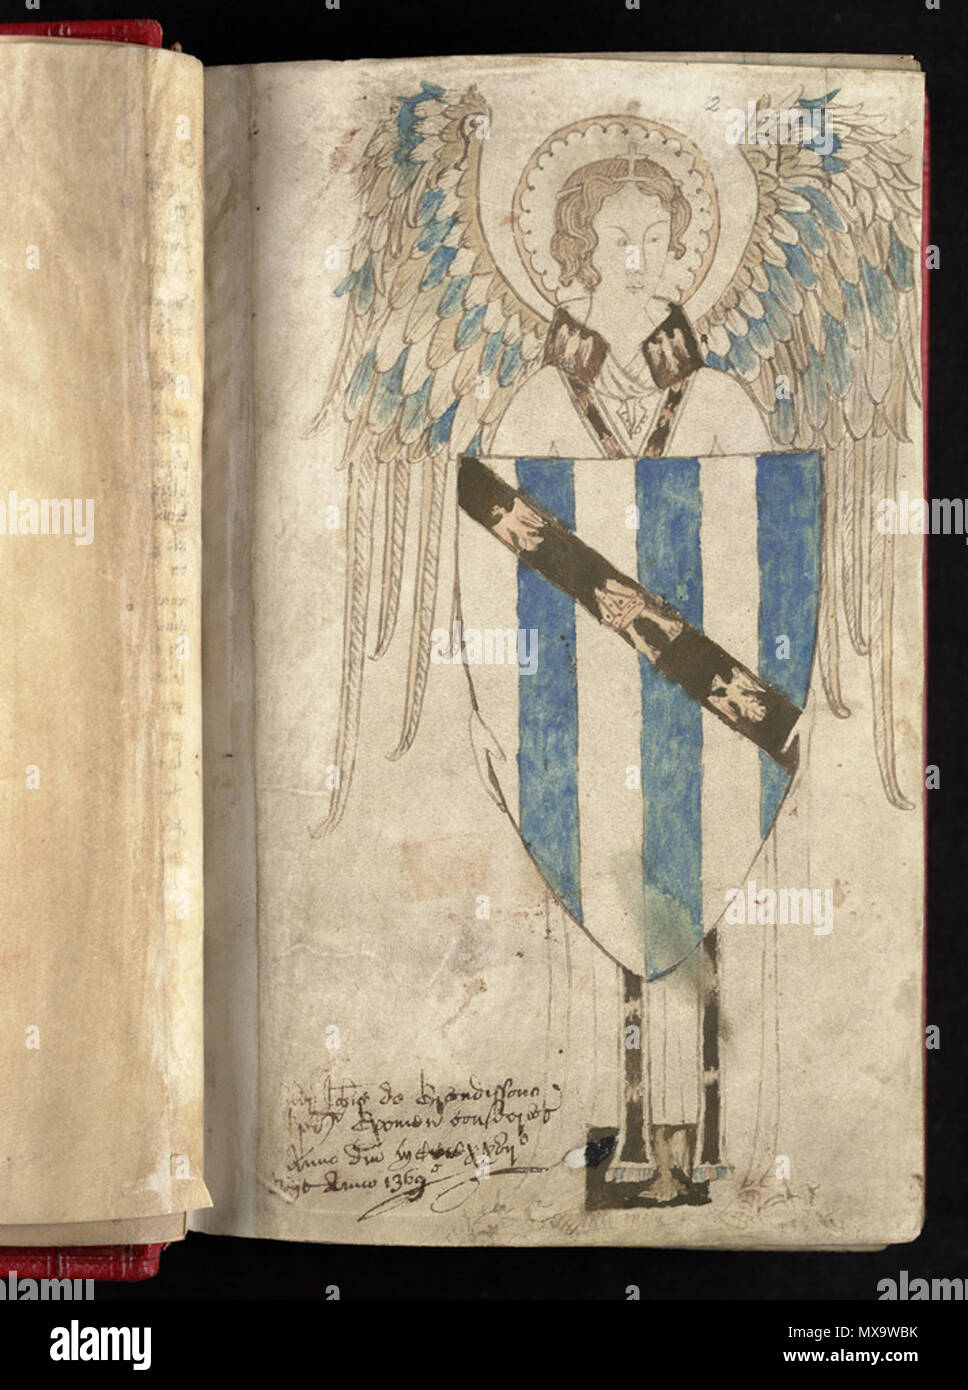 . English: John Grandisson, Bishop of Exeter from 1327 -1369 15 July Coat of arms in his psalter. Blazon: Paly of six argent and azure a bend sable charged with a mitre upon a priest's stole between two eagles displayed, argent. 'Lives of the Bishops of Exeter' describes his actual arms (being Grandisson differenced by substitution of the mitre for the middle eagle) as: Paly of six argent and azure, a bend gules, charged with a mitre between two eaglets displayed, or. Grandisson bequeathed his Psalter to Isabella, dau. of King Edward III . 7 December 2013, 12:59:48. unknown - paid for by John  Stock Photo